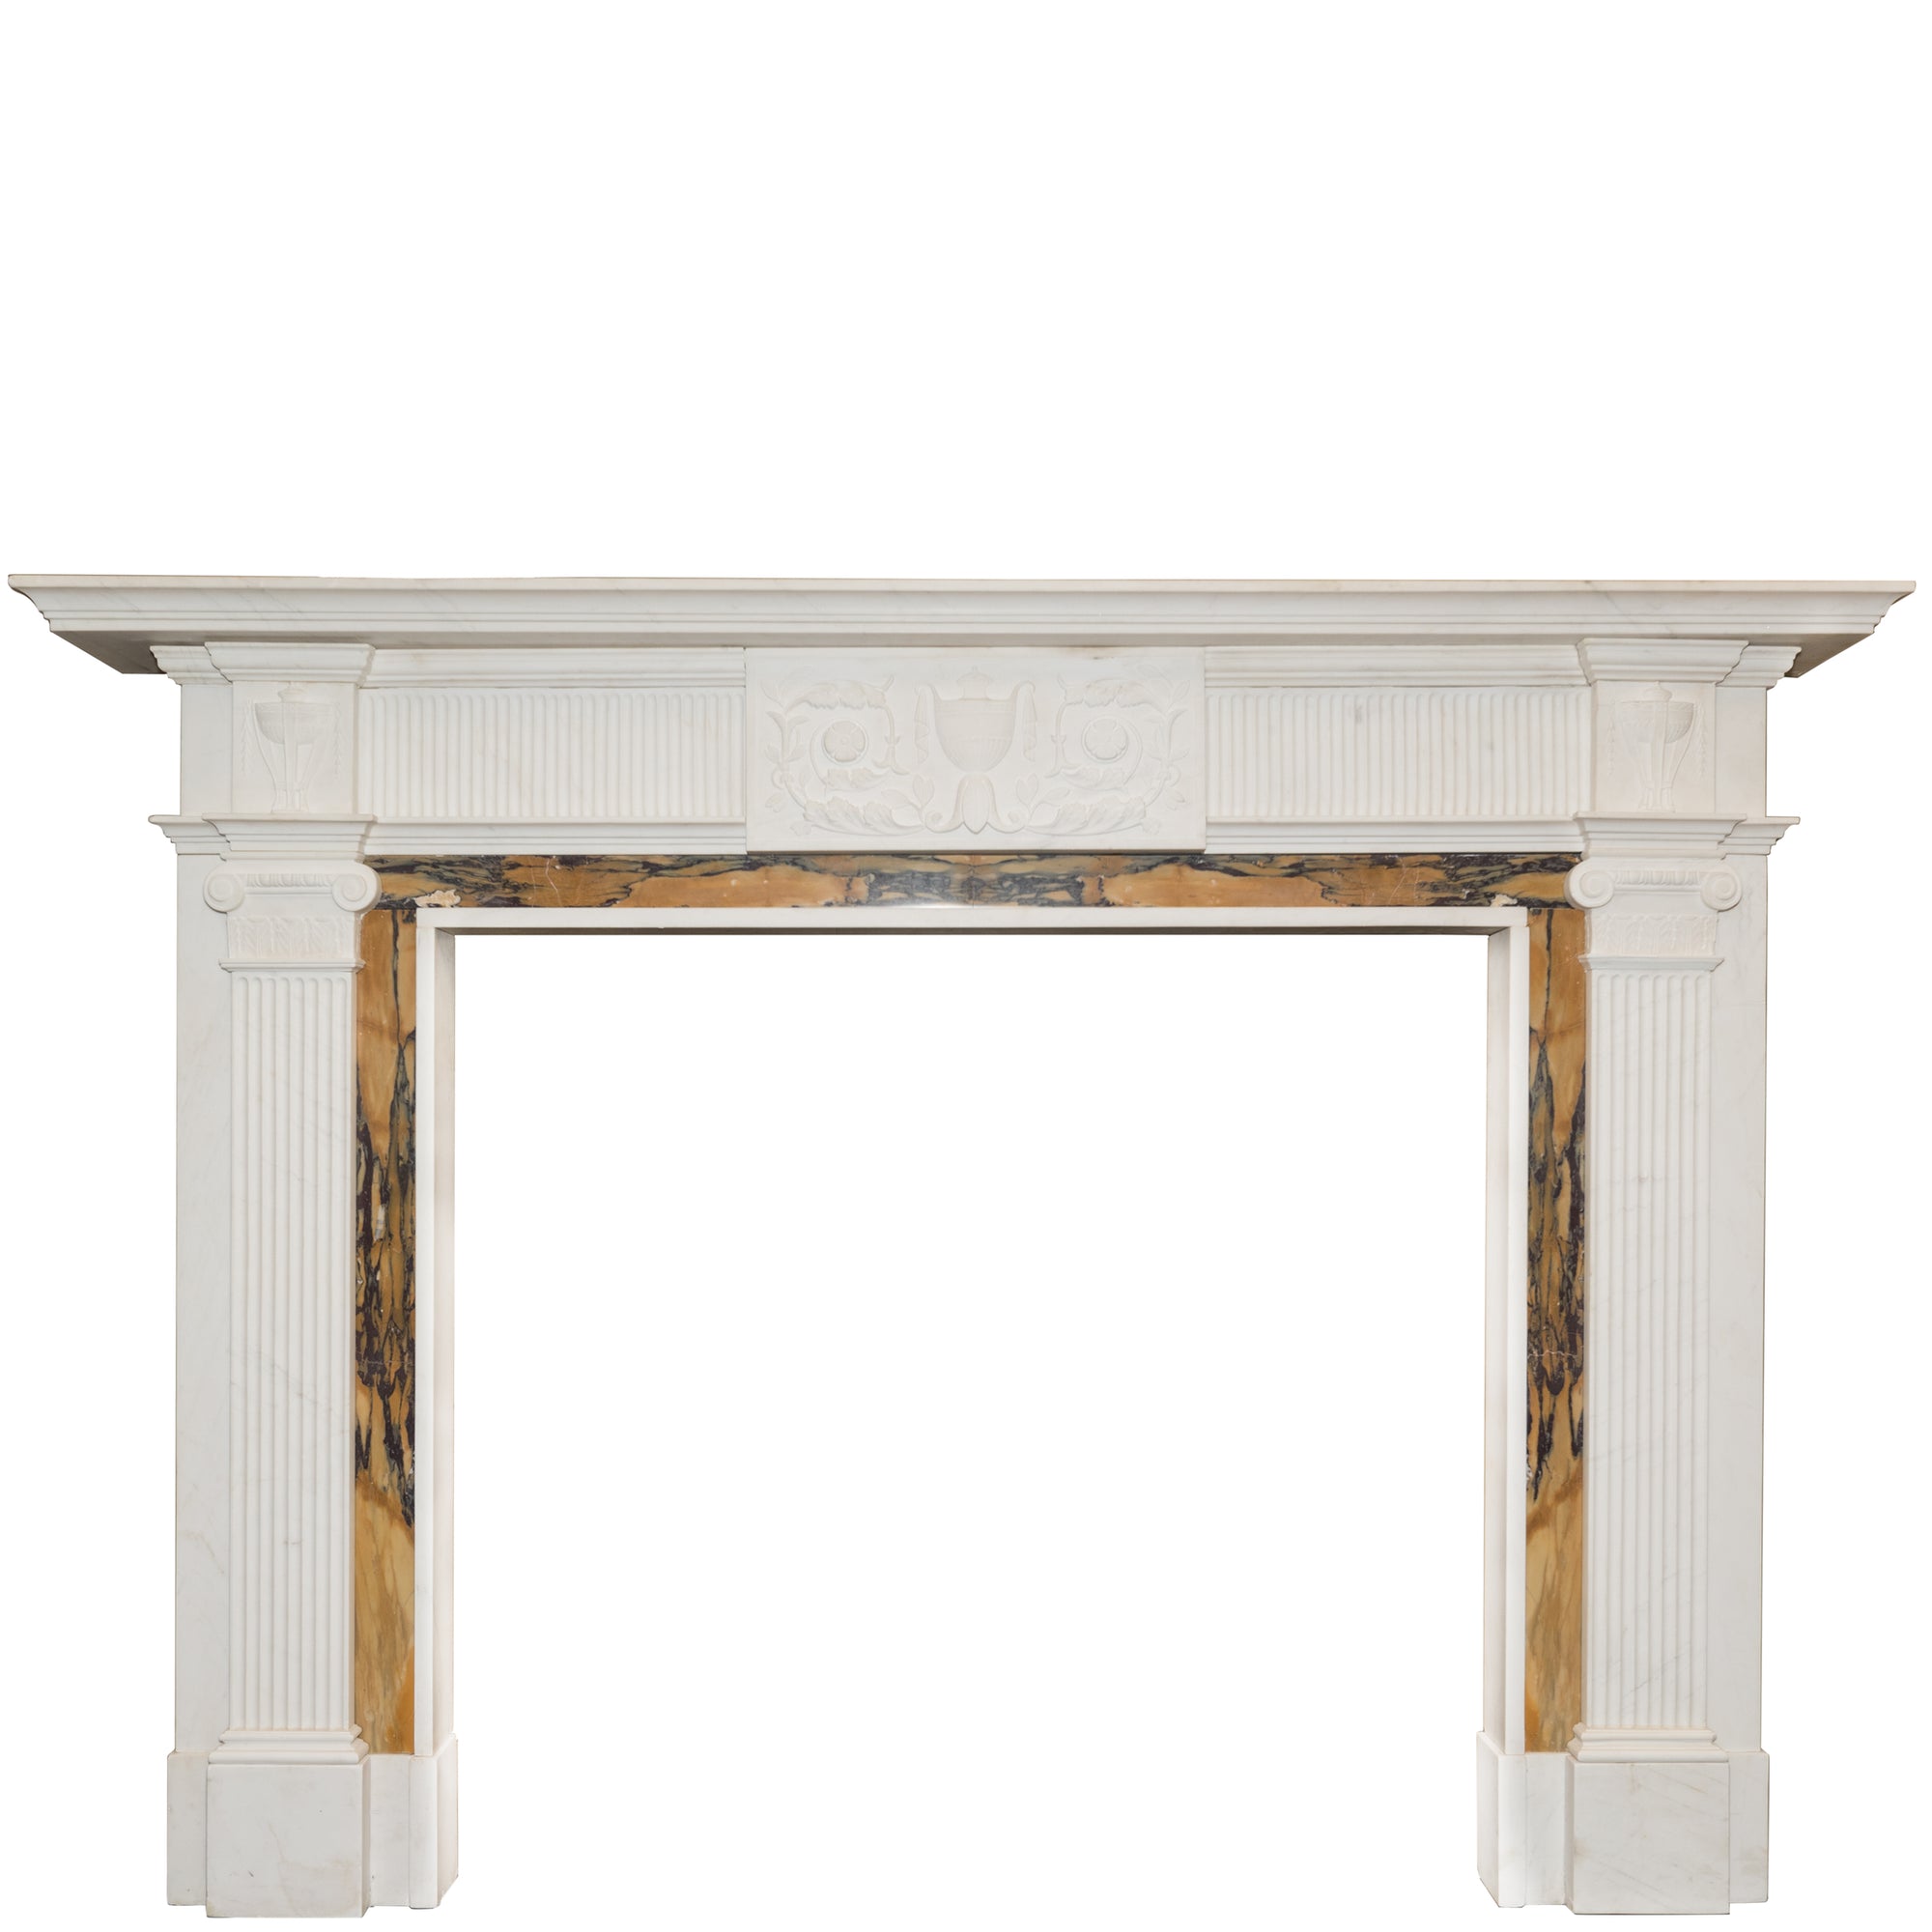 Georgian Style Statutory & Sienna Marble Fireplace Surround | The Architectural Forum